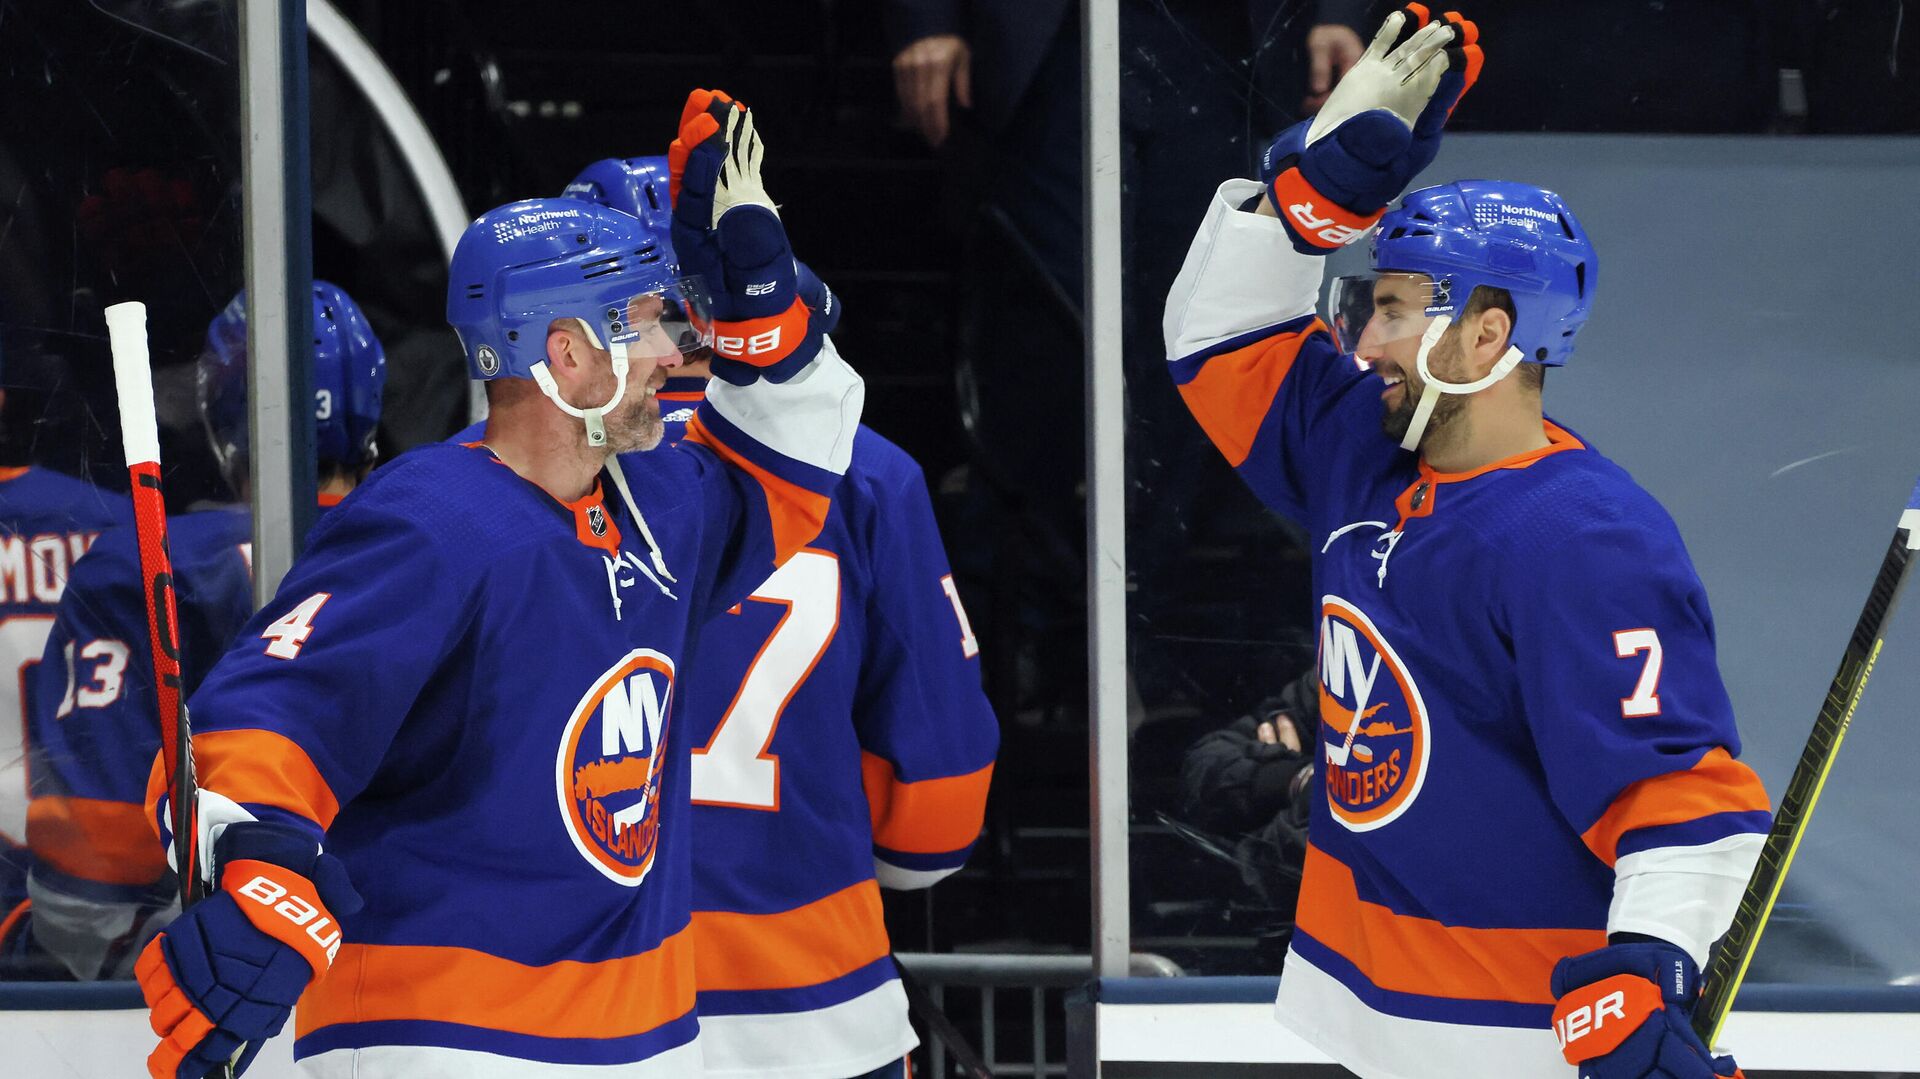 UNIONDALE, NEW YORK - MAY 22: Andy Greene #4 and Jordan Eberle #7 of the New York Islanders celebrate a 4-1 win over the Pittsburgh Penguins in Game Four of the First Round of the 2021 Stanley Cup Playoffs at the Nassau Coliseum on May 22, 2021 in Uniondale, New York.   Bruce Bennett/Getty Images/AFP (Photo by BRUCE BENNETT / GETTY IMAGES NORTH AMERICA / Getty Images via AFP) - РИА Новости, 1920, 23.05.2021